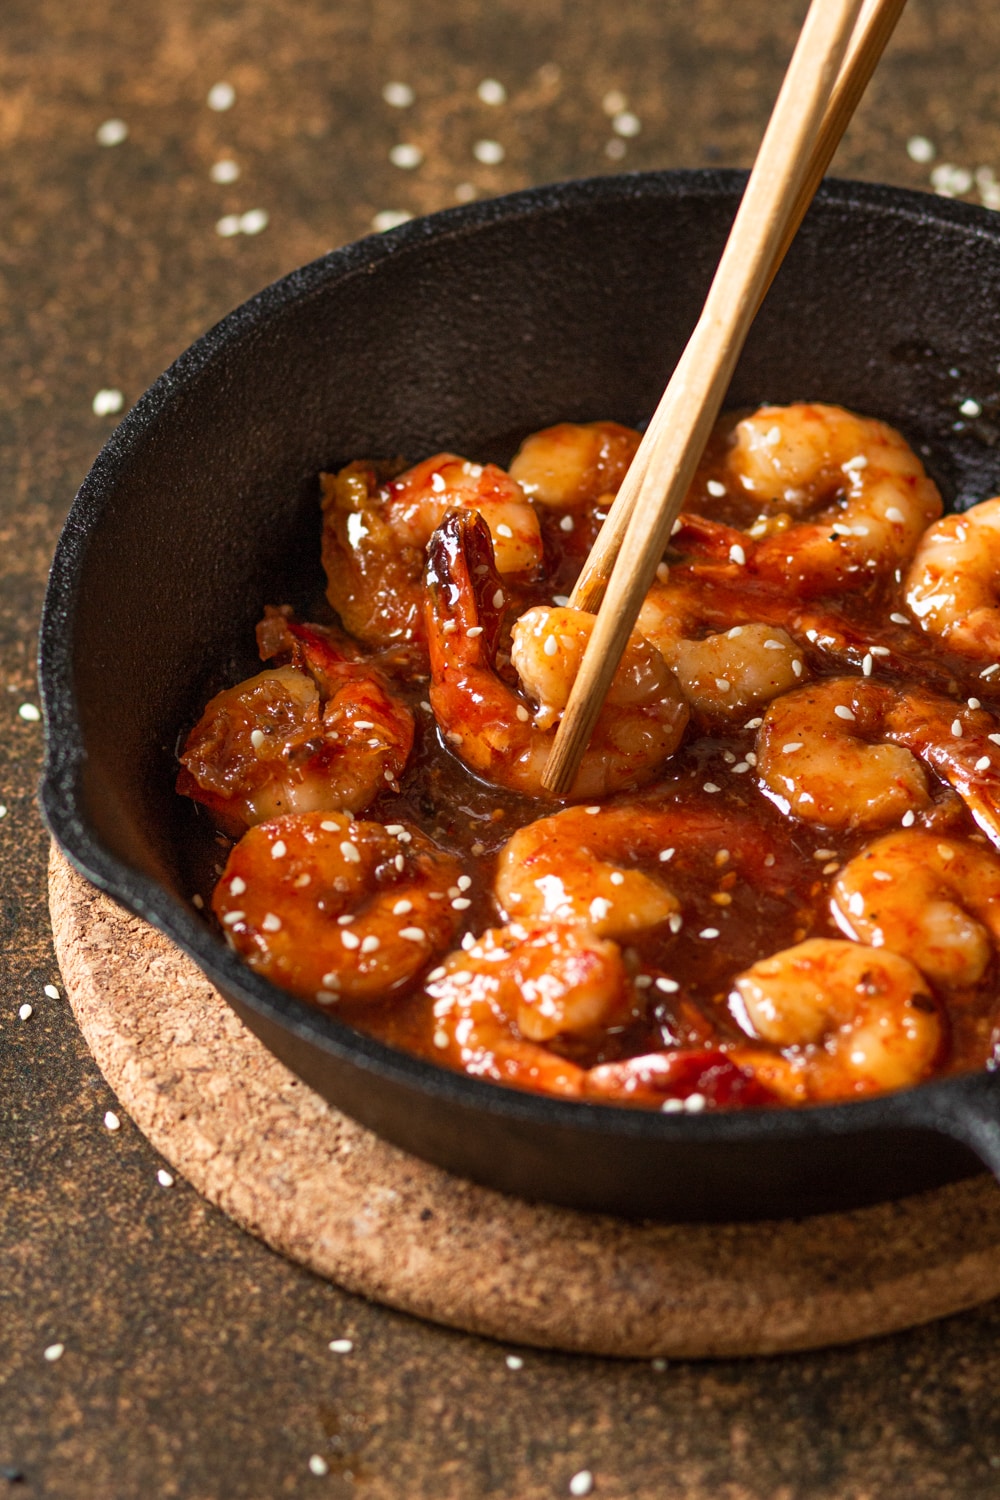 Several pieces of shrimp in a firecracker sauce in a skillet. There is a set of chopsticks grabbing a piece of shrimp from the skillet. The skillet is on a circular cork board which is on a brown counter.